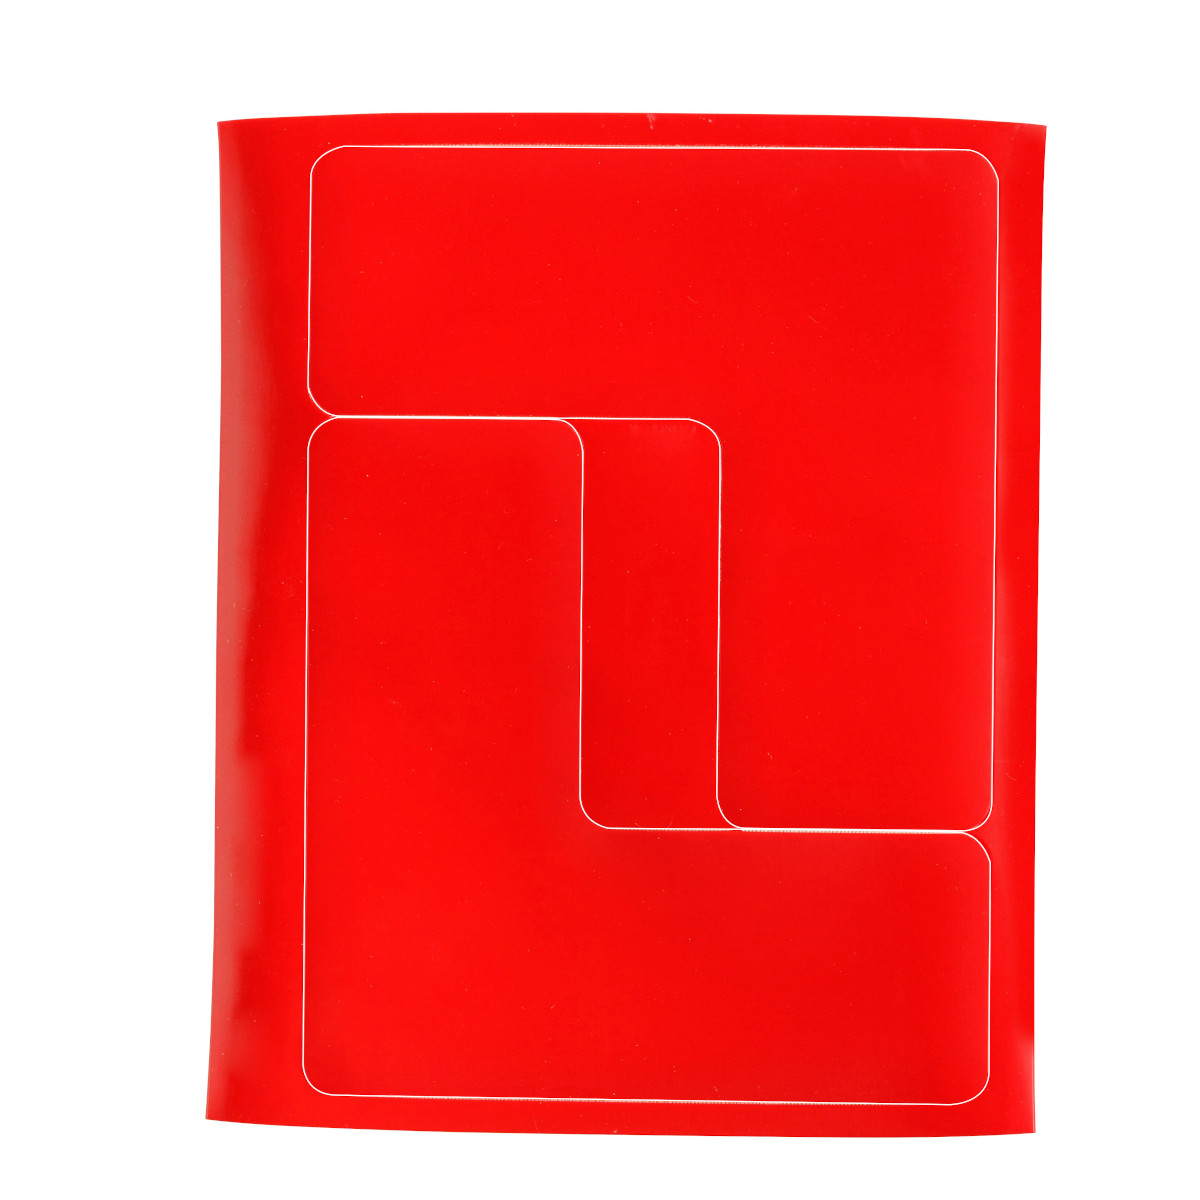 【170122】4" X 10" B543 THICK RED FLOOR LS